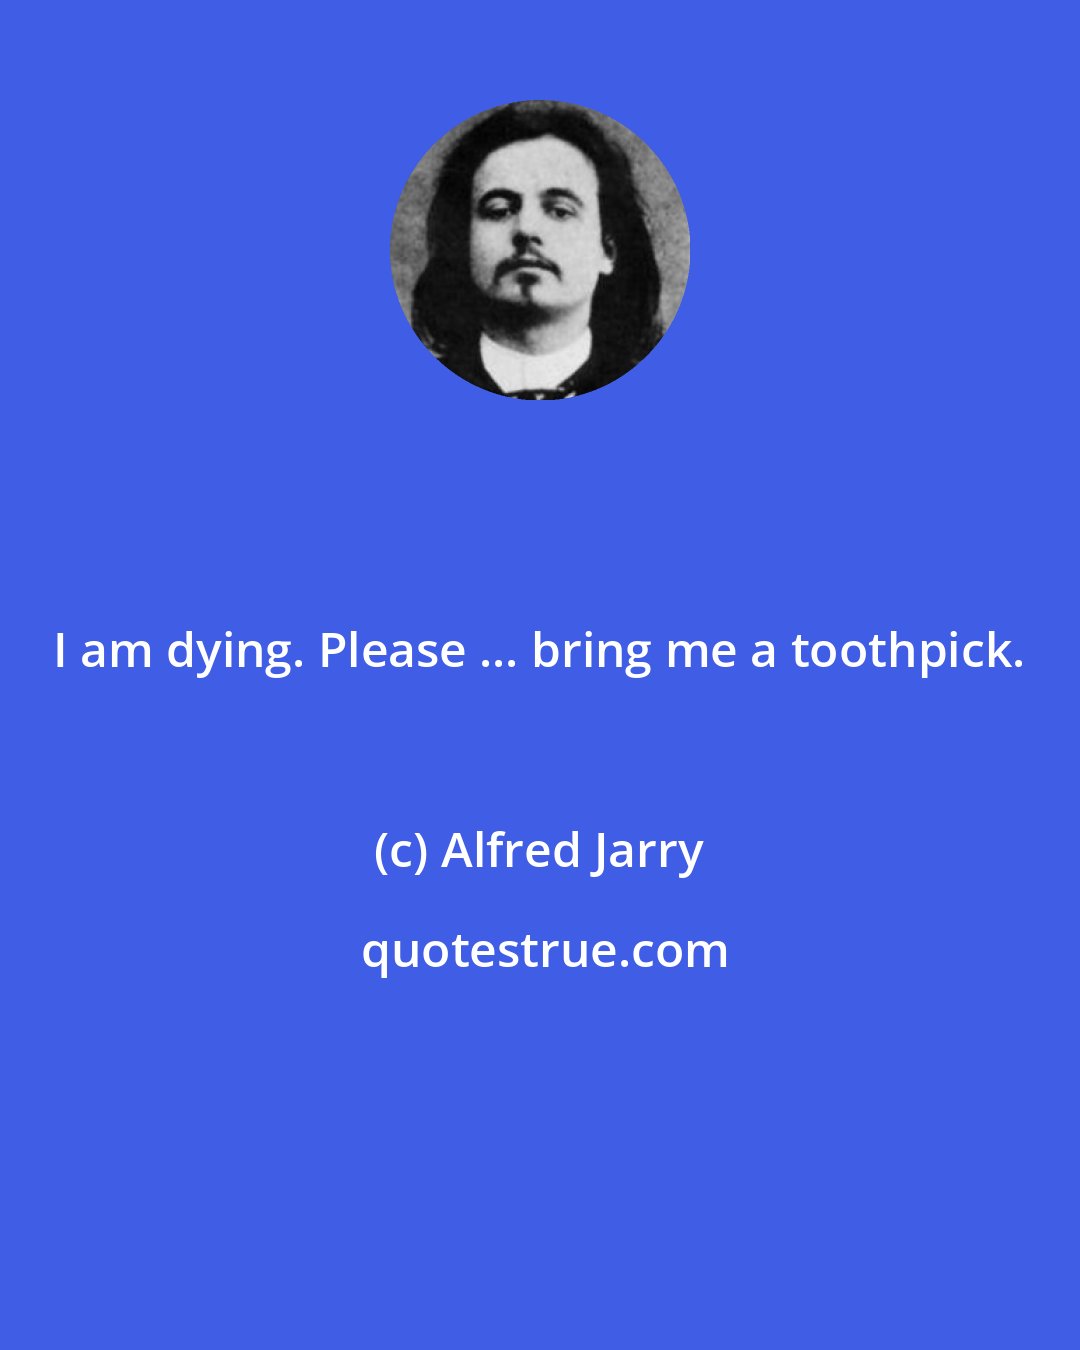 Alfred Jarry: I am dying. Please ... bring me a toothpick.